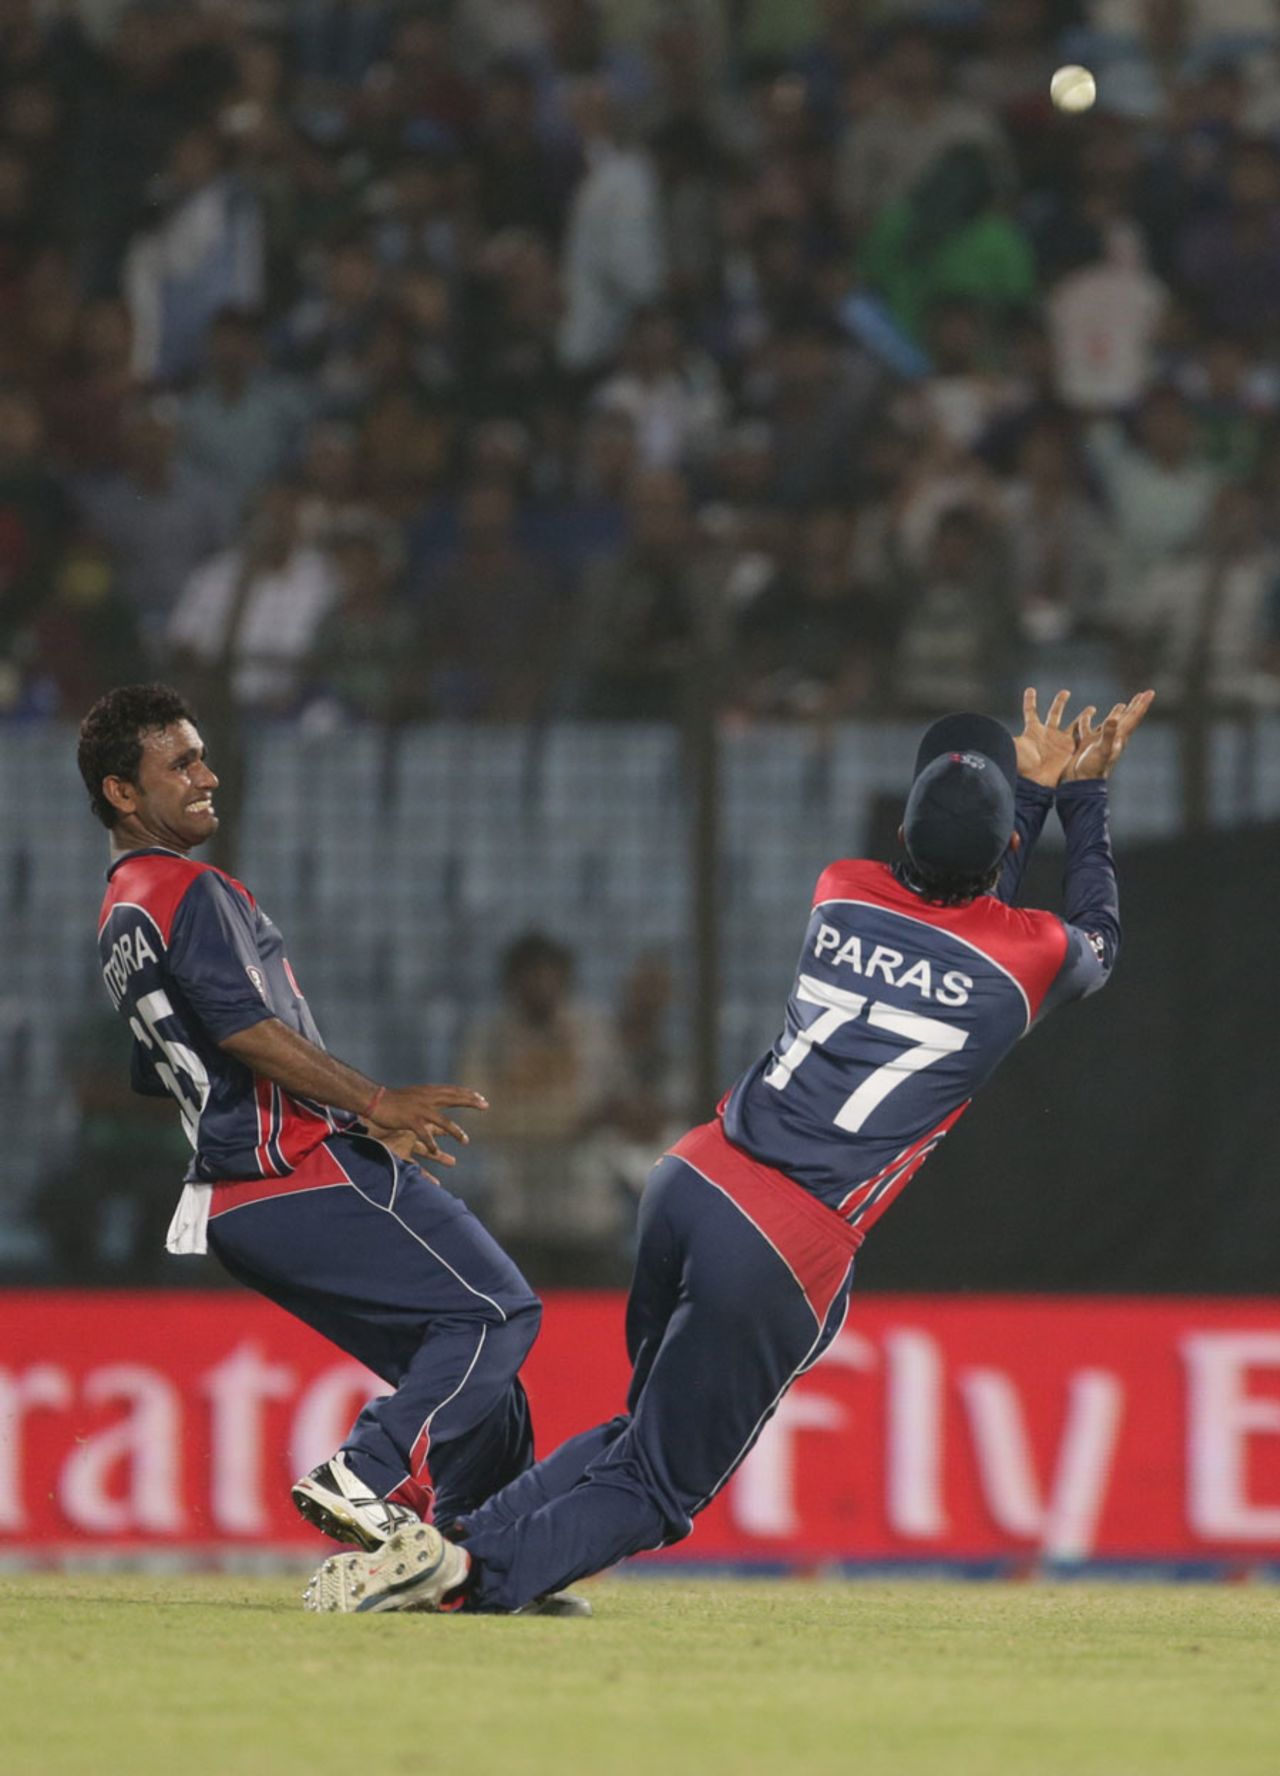 Paras Khadka takes a diving catch, Afghanistan v Nepal, World Twenty20, Group A, Chittagong, March 20, 2014